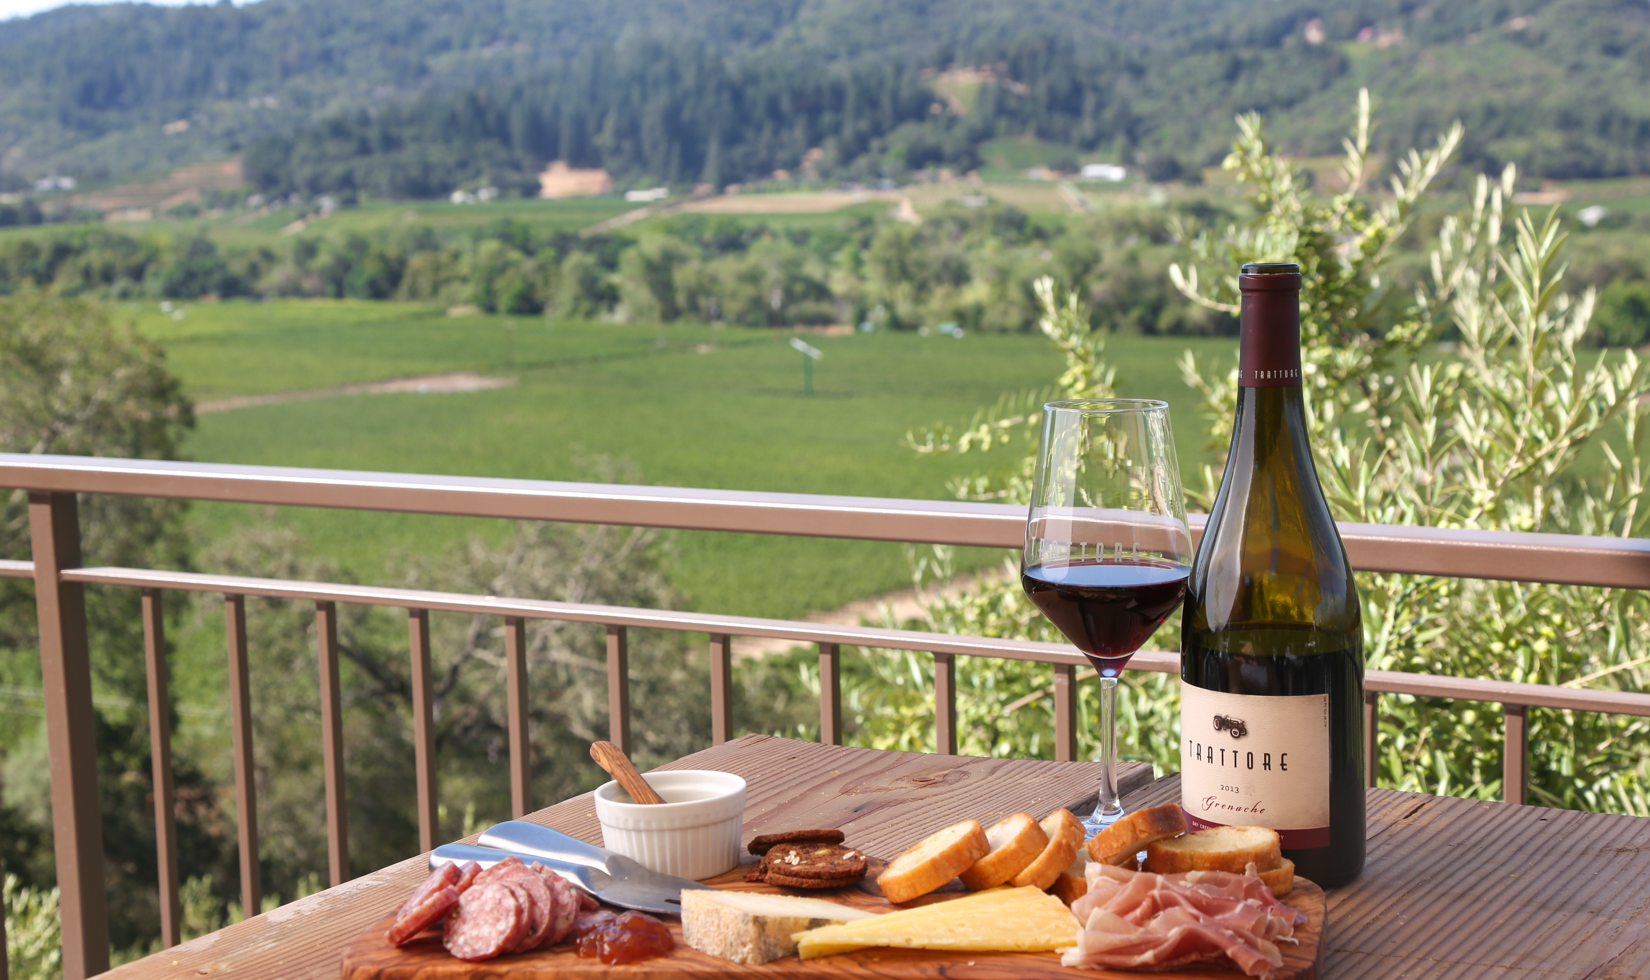 Trattore offers great charcuterie and wine pairings